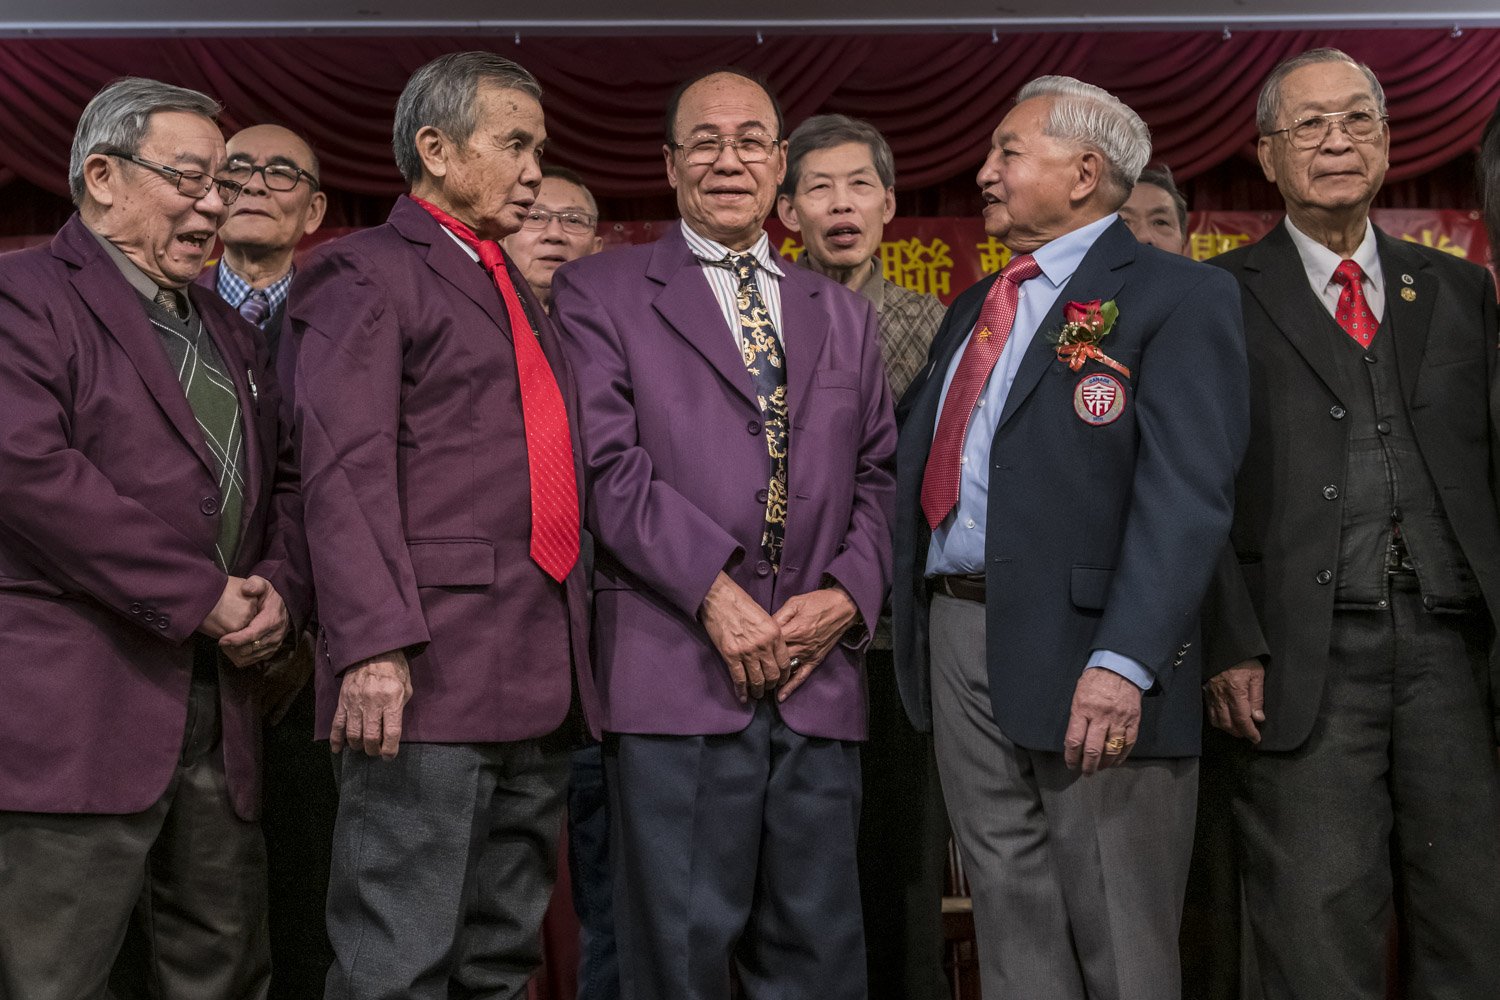  Members from the Yee Fung Toy Society poses for a portrait during a New Year celebration event. Several traditional clans composed of members with the same family name were established in Chinatown during the first quarter of the 20th century; like 